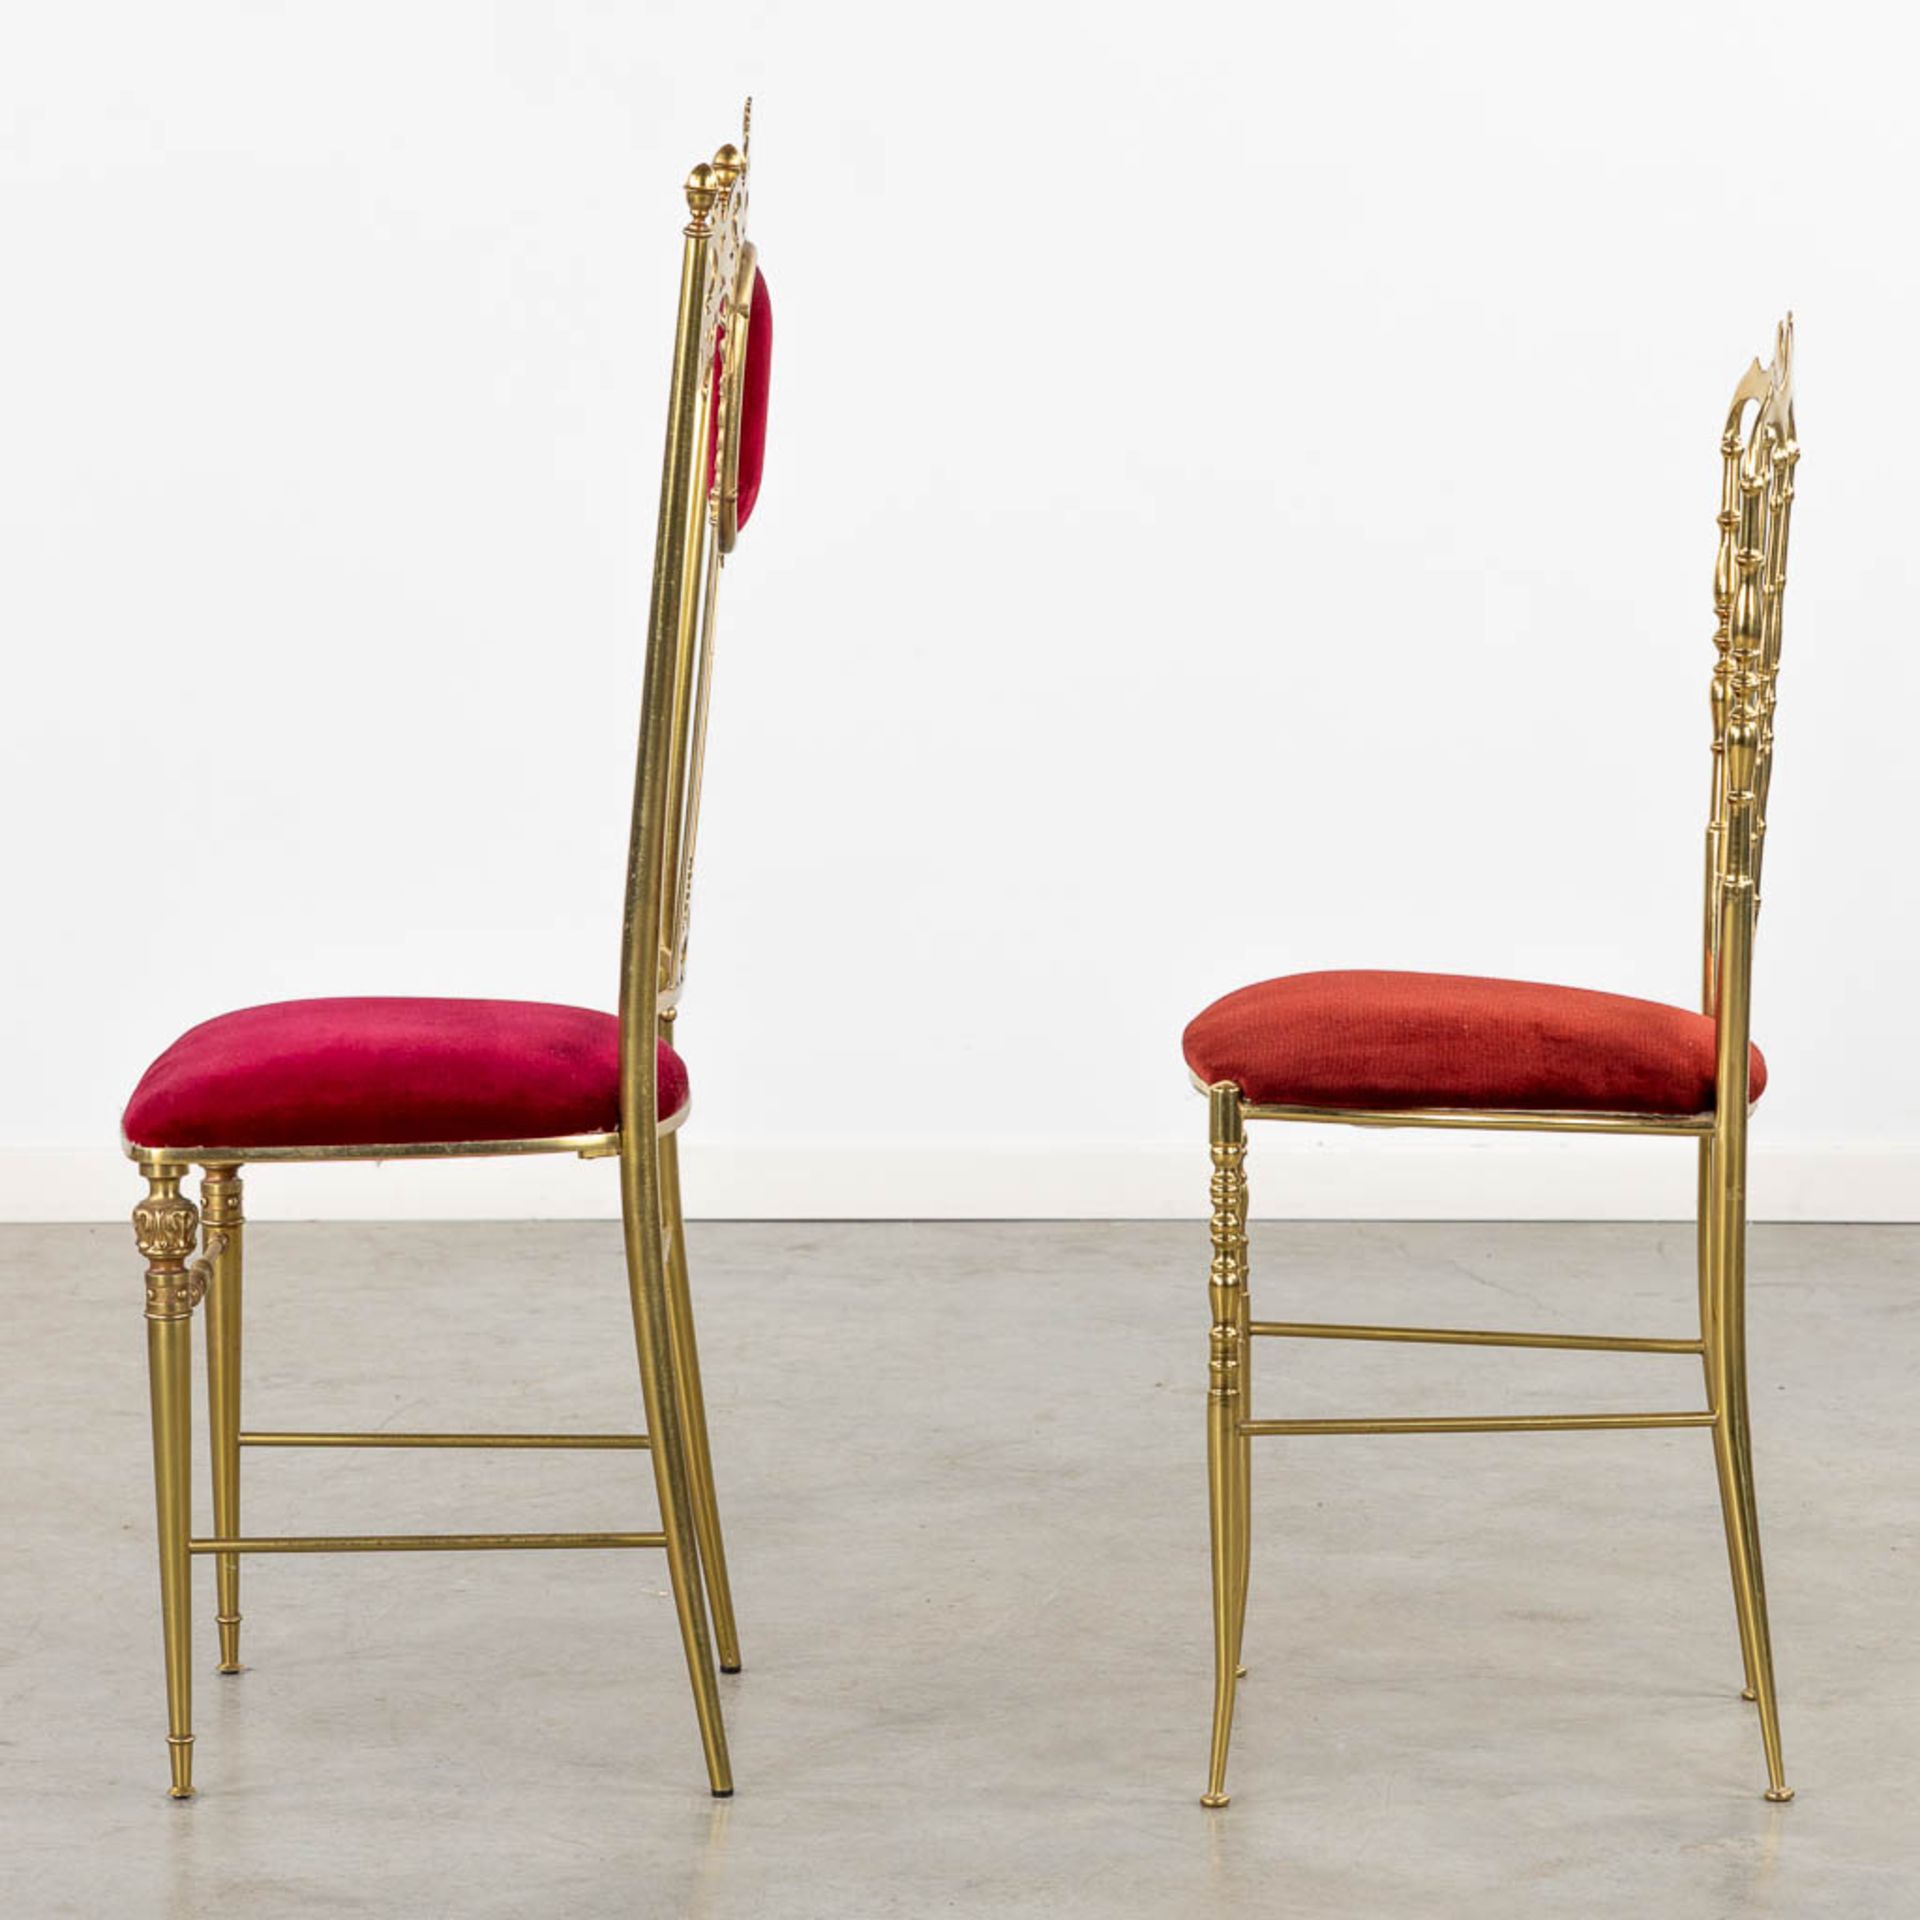 Two Metal and gilt chairs, circa 1970. (L:40 x W:40 x H:108 cm) - Image 4 of 10